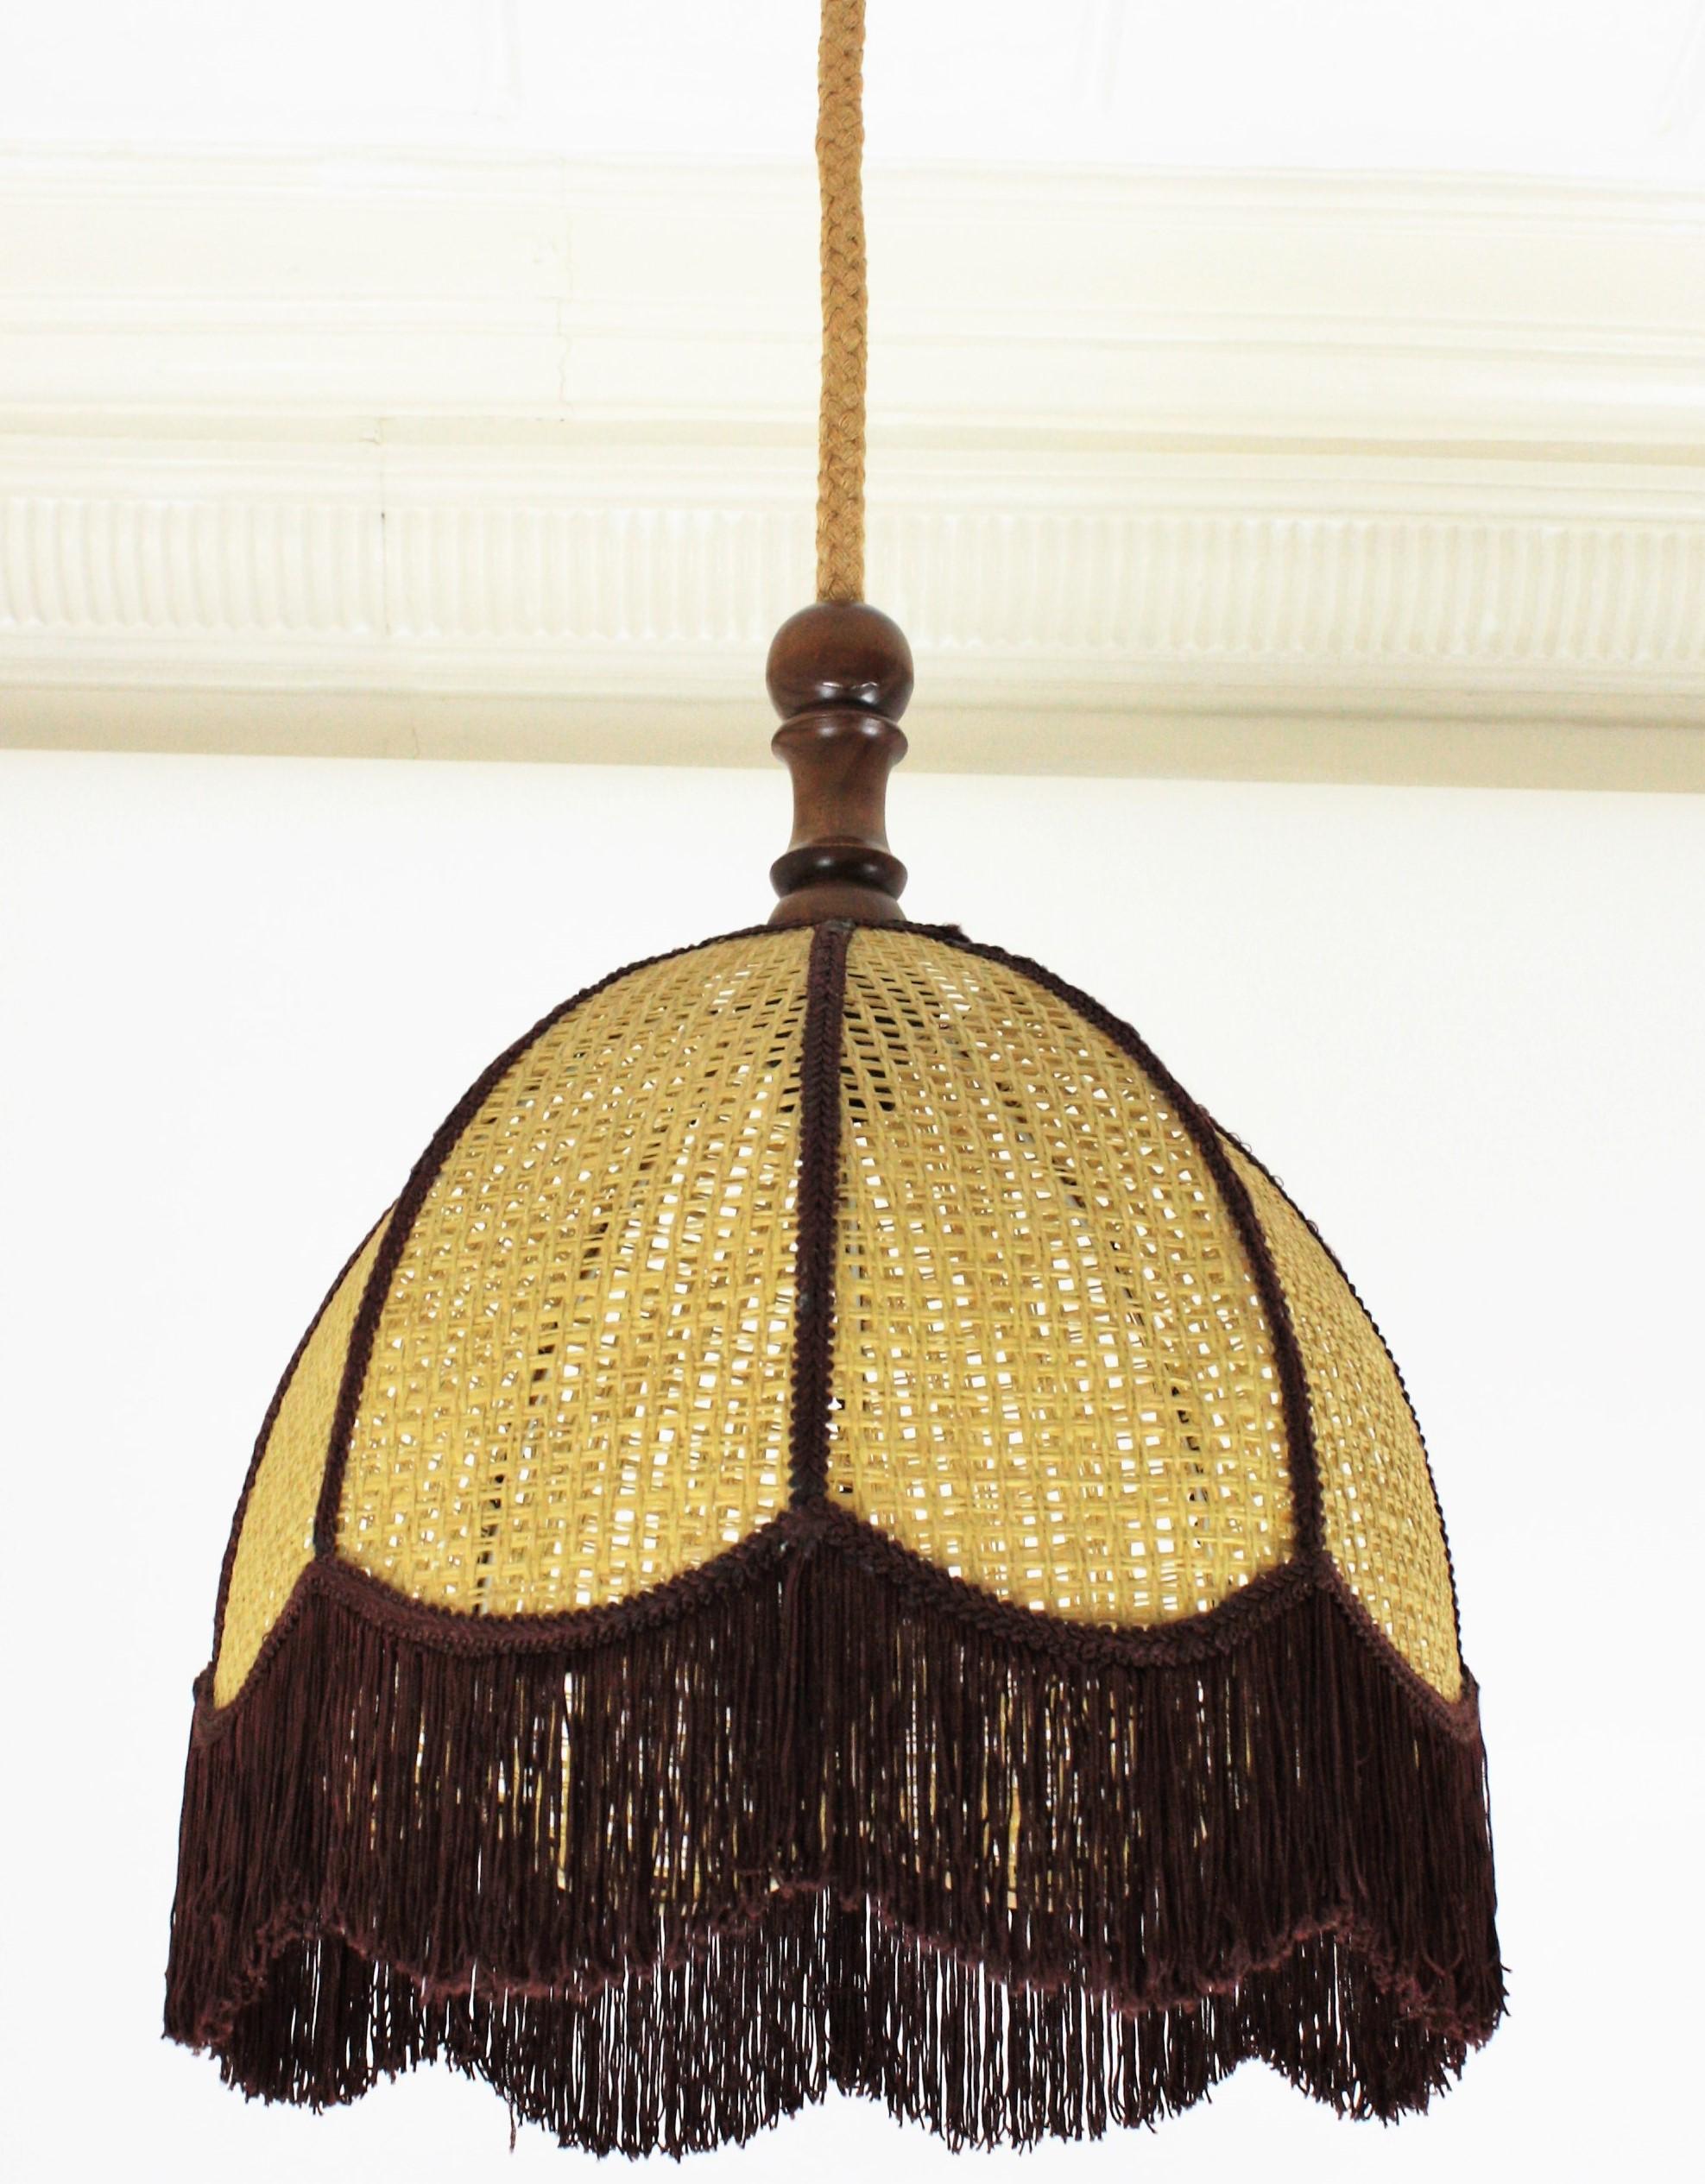 Eye-catching vintage rattan / wicker wire bell shaped lantern or pendant with trims and fringe, Spain, 1960s-1970s.
This midcentury suspension lamp features a wicker wire bell shaped fringe lampshade. It hangs from its original rope and wooden